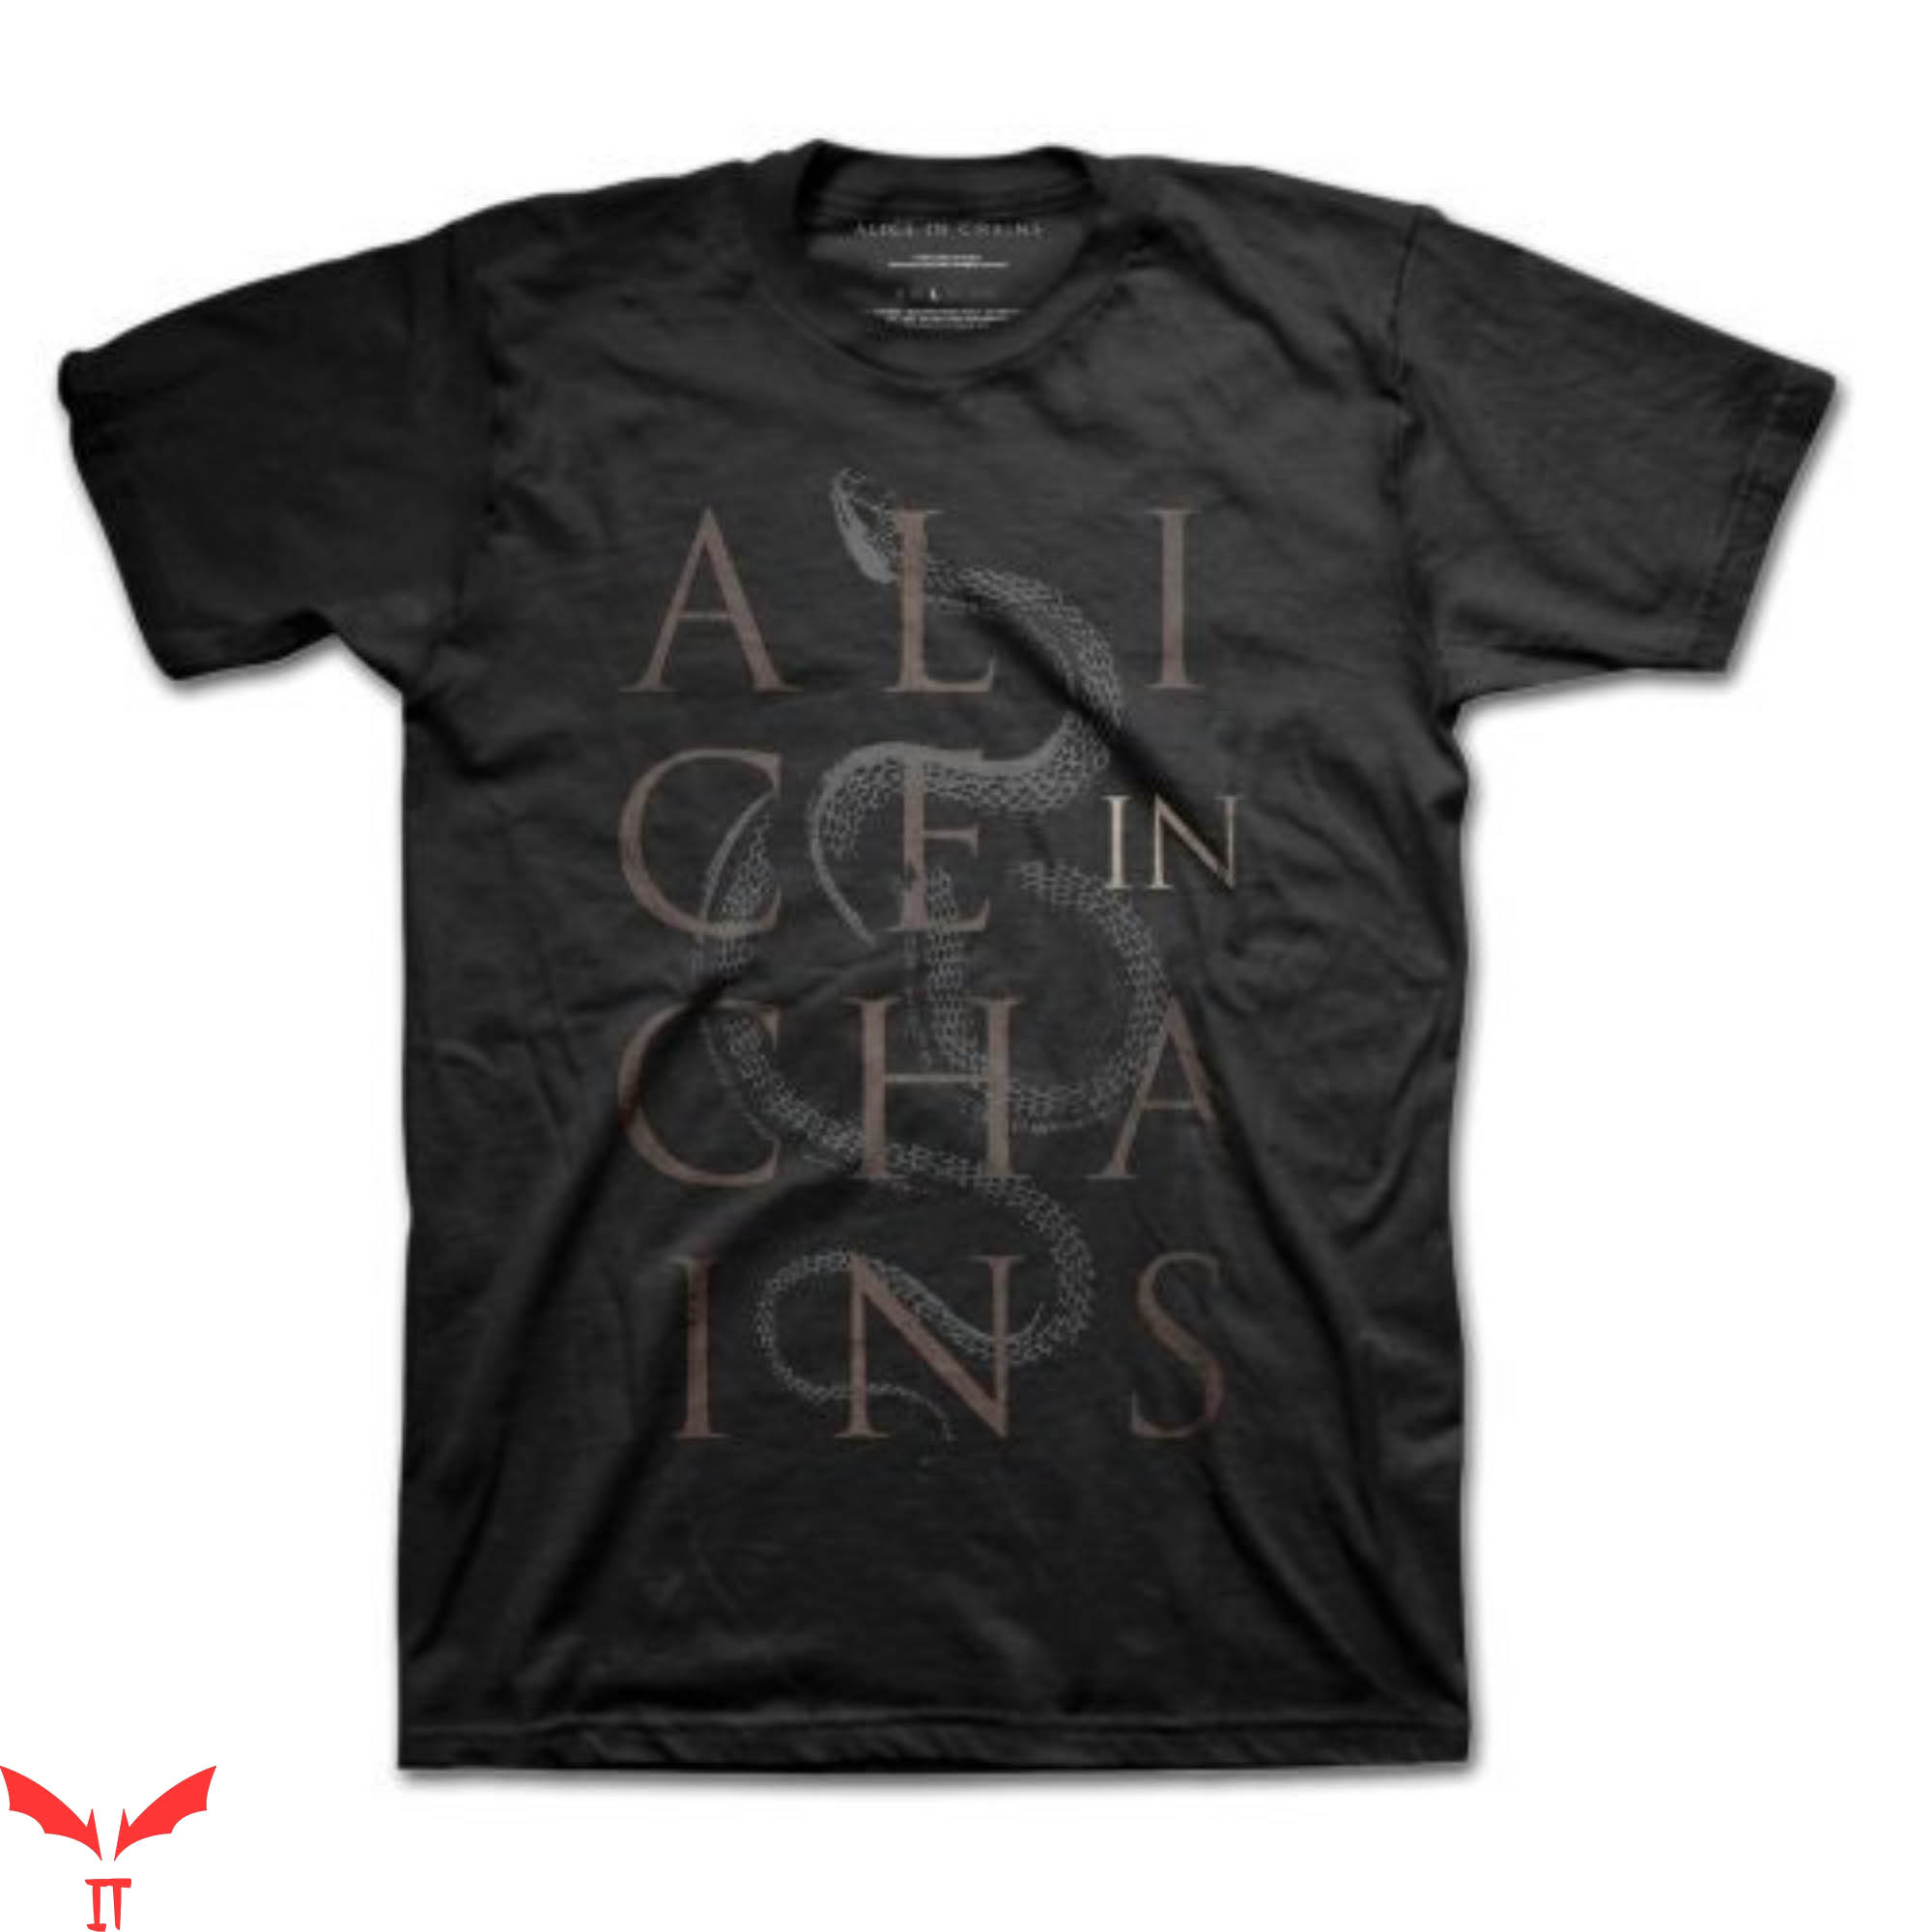 Vintage Alice In Chains T-Shirt Snakes Rock Retro Tee